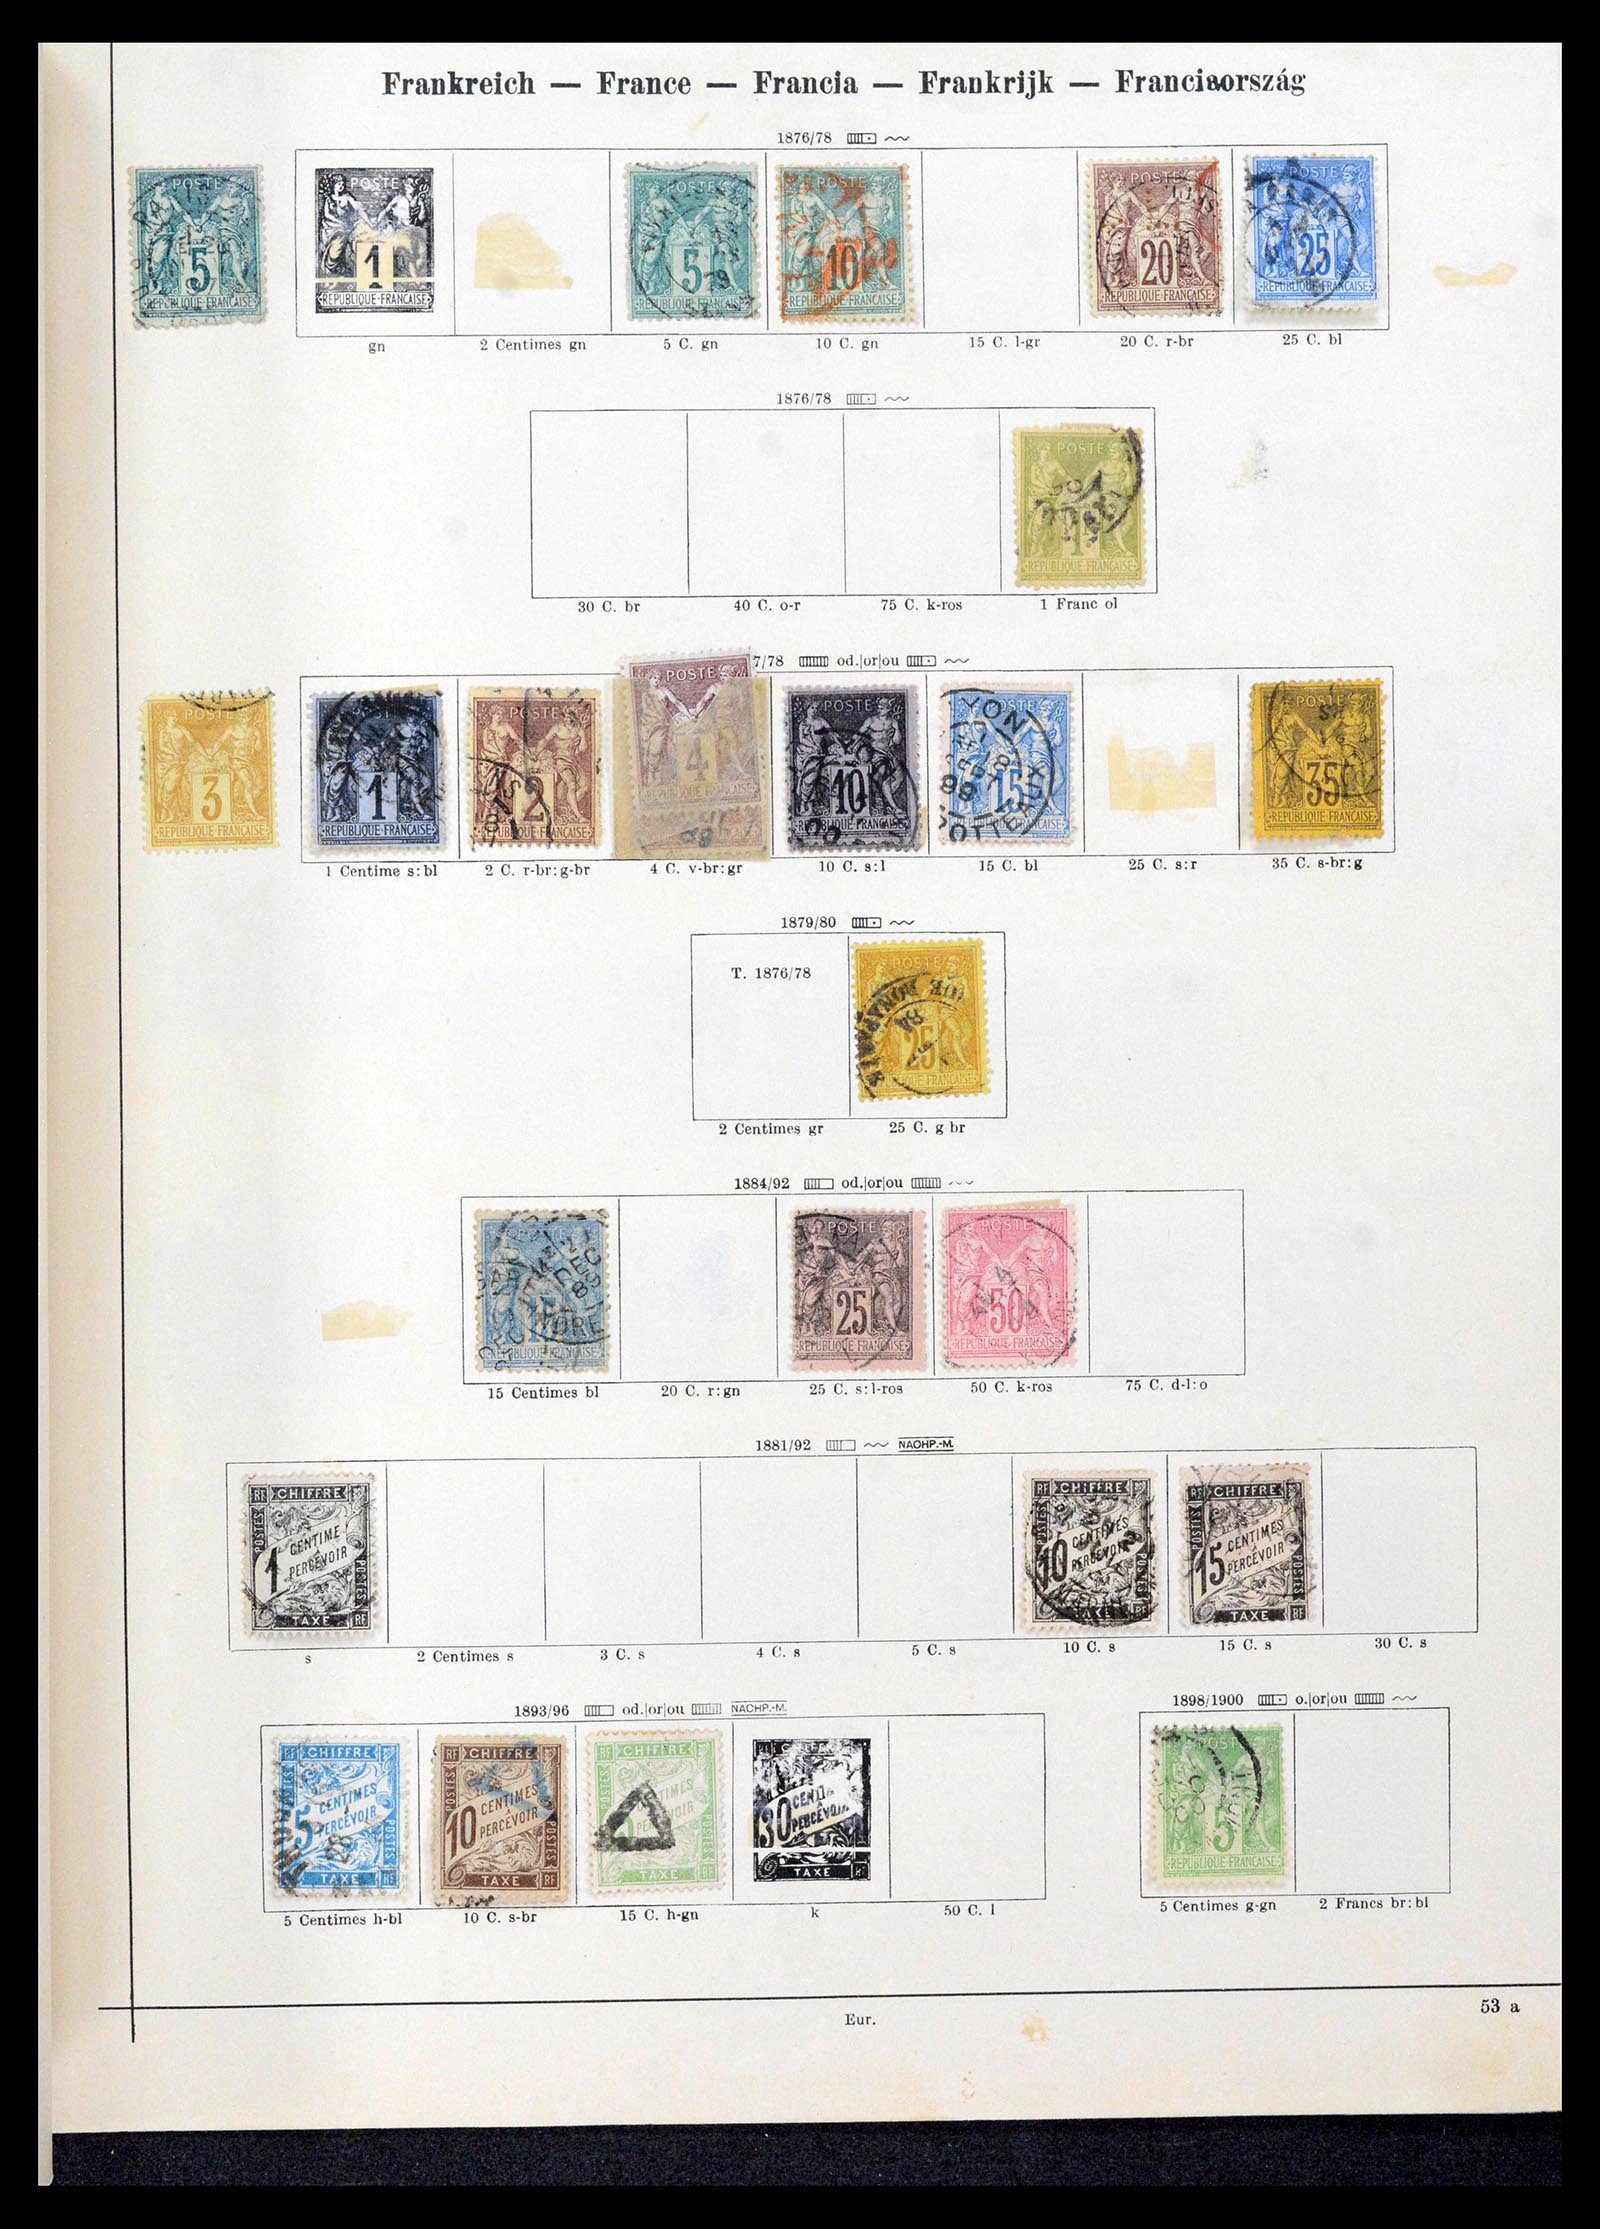 39164 0288 - Stamp collection 39164 France 1849-1981.